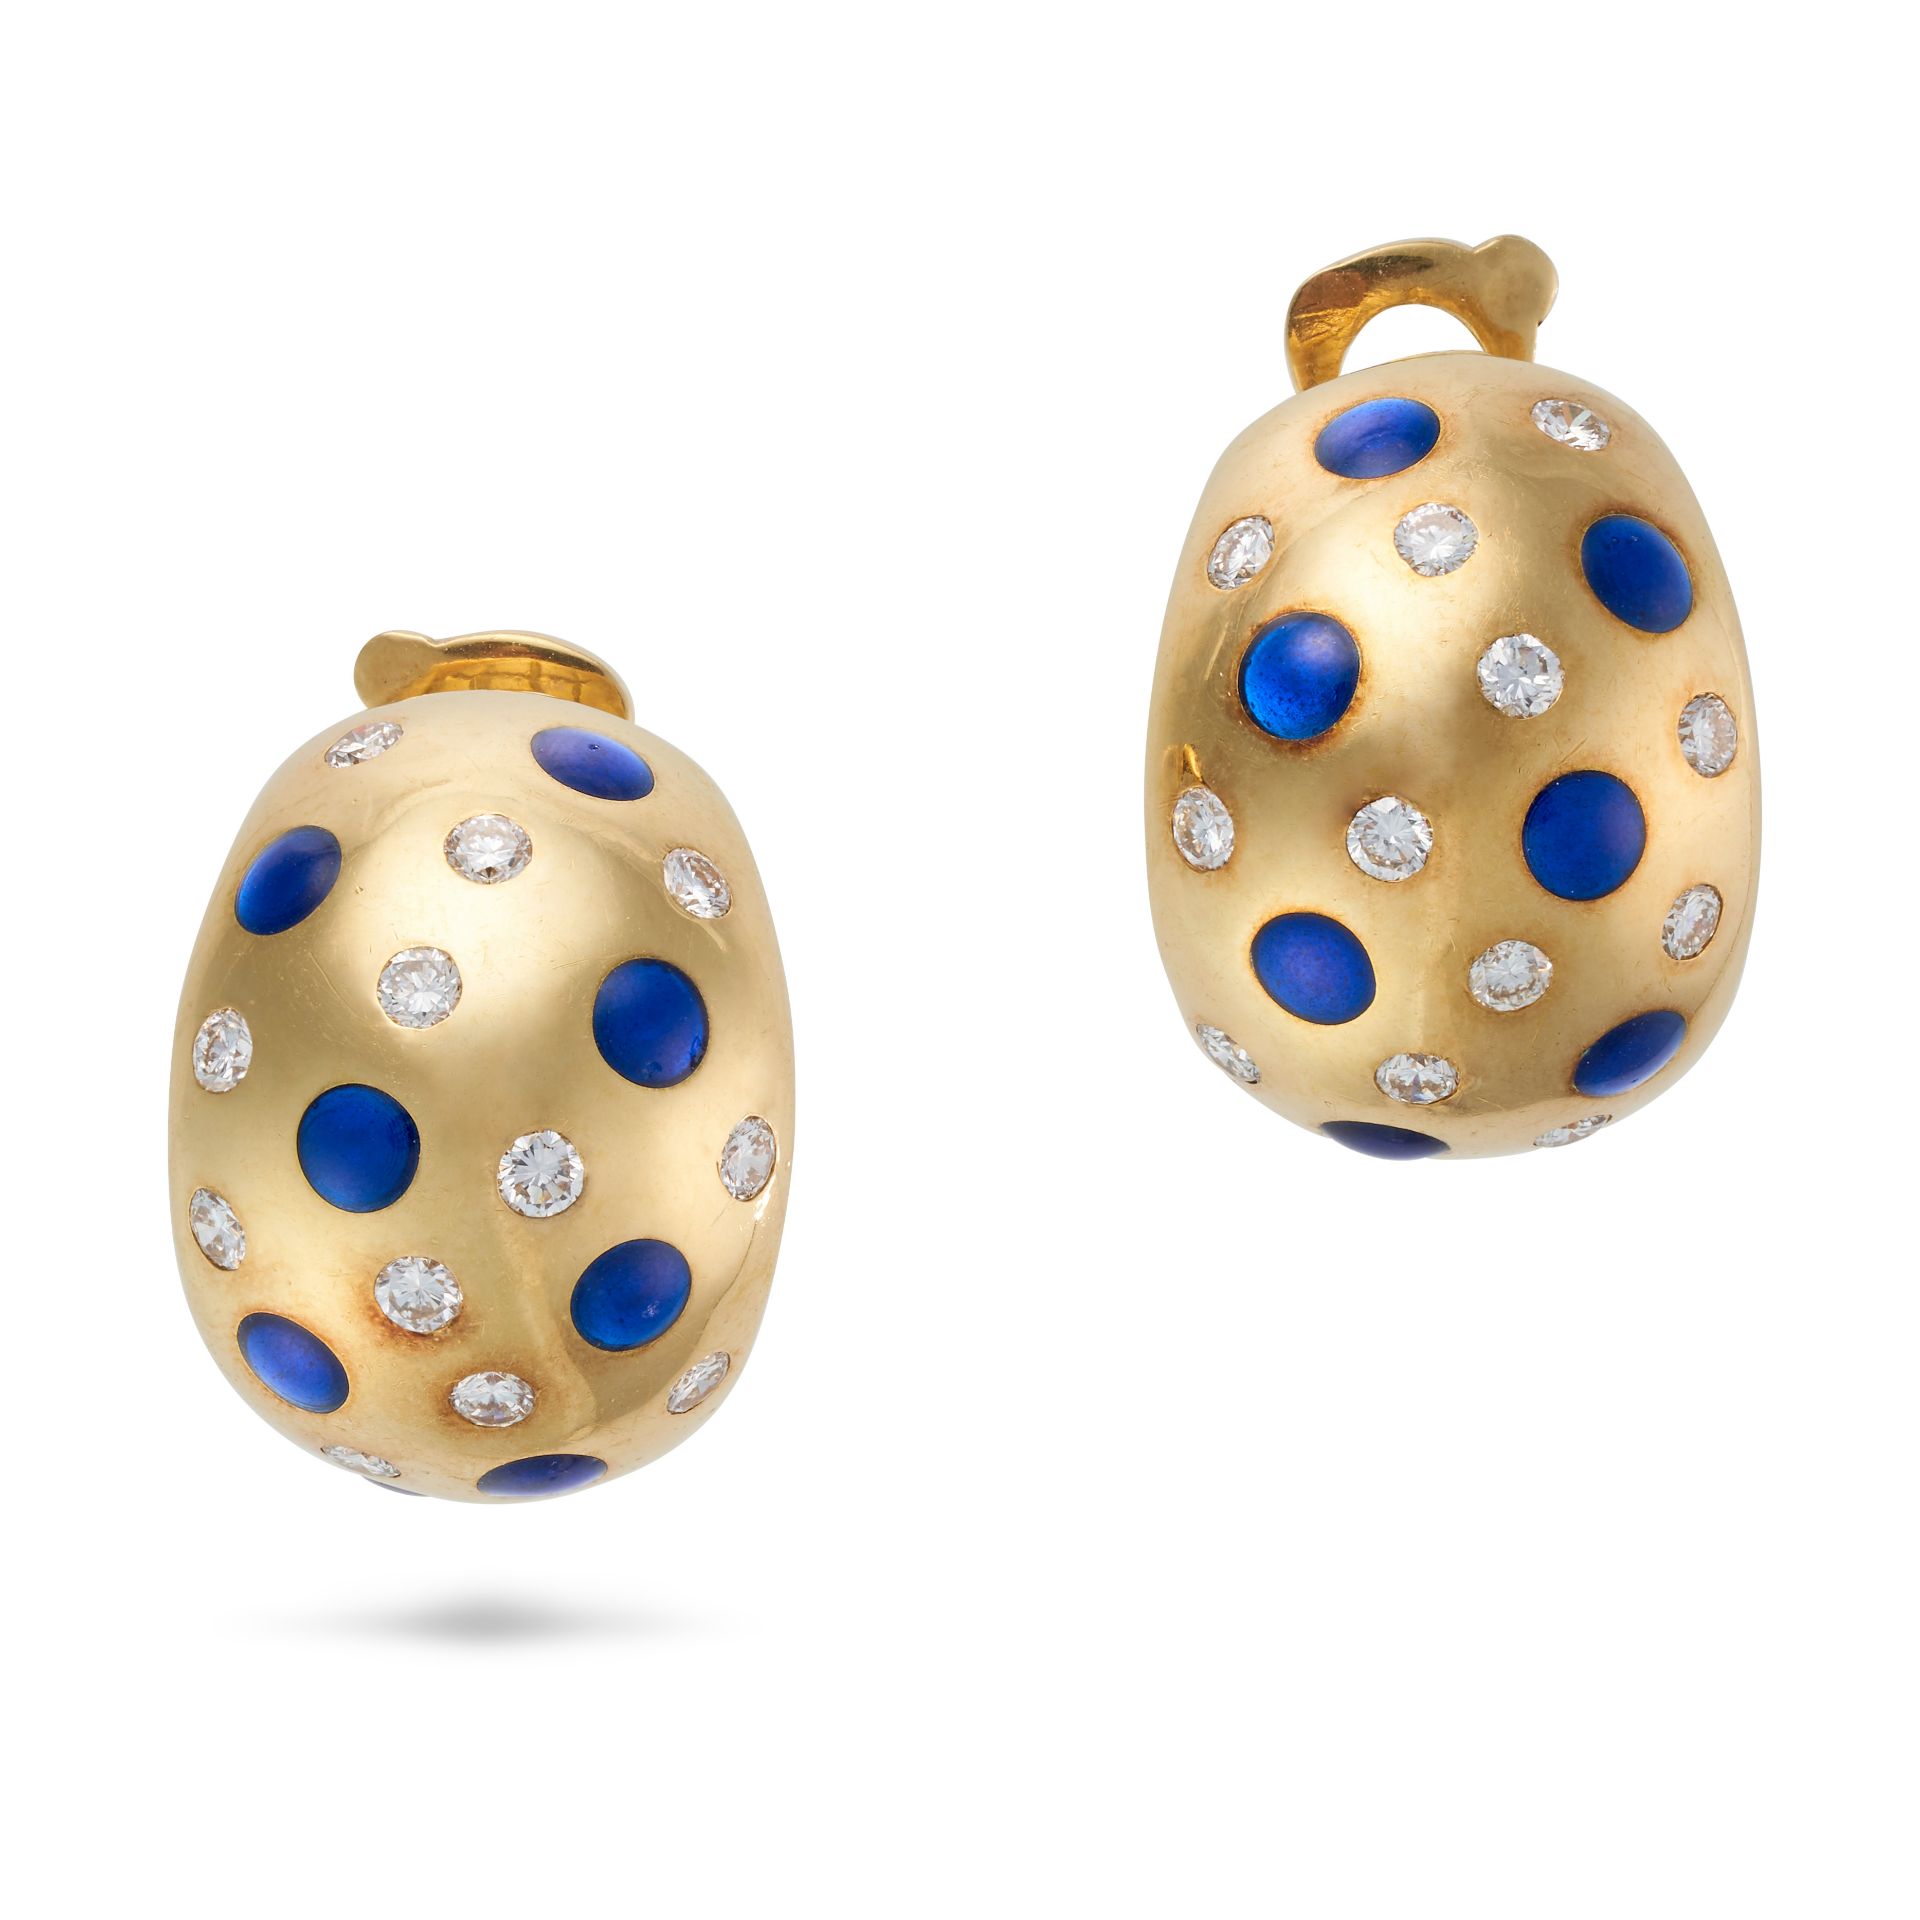 VAN CLEEF & ARPELS, A DIAMOND AND ENAMEL RING AND EARRINGS SUITE the bombe ring set with round br... - Image 4 of 4